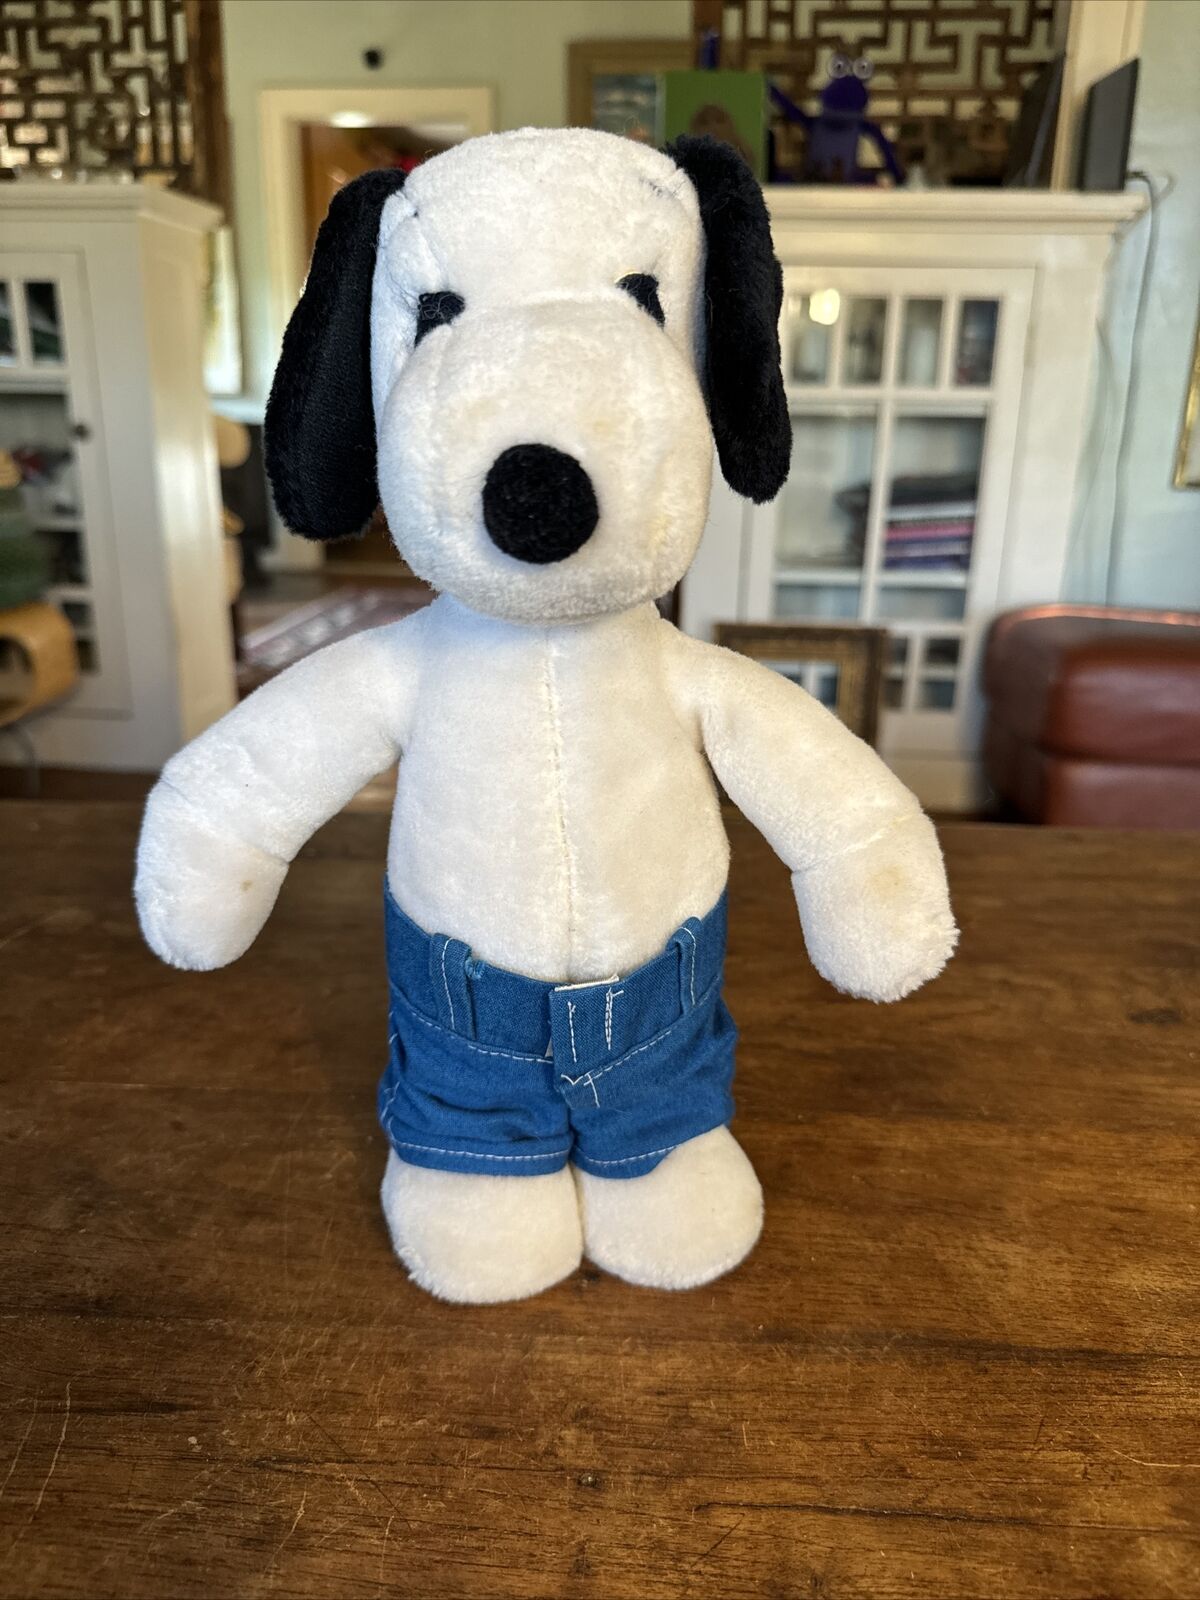 1968 Snoopy Plush Stuffed Toy Dog Vintage Peanuts United Featured Syndicate Inc.